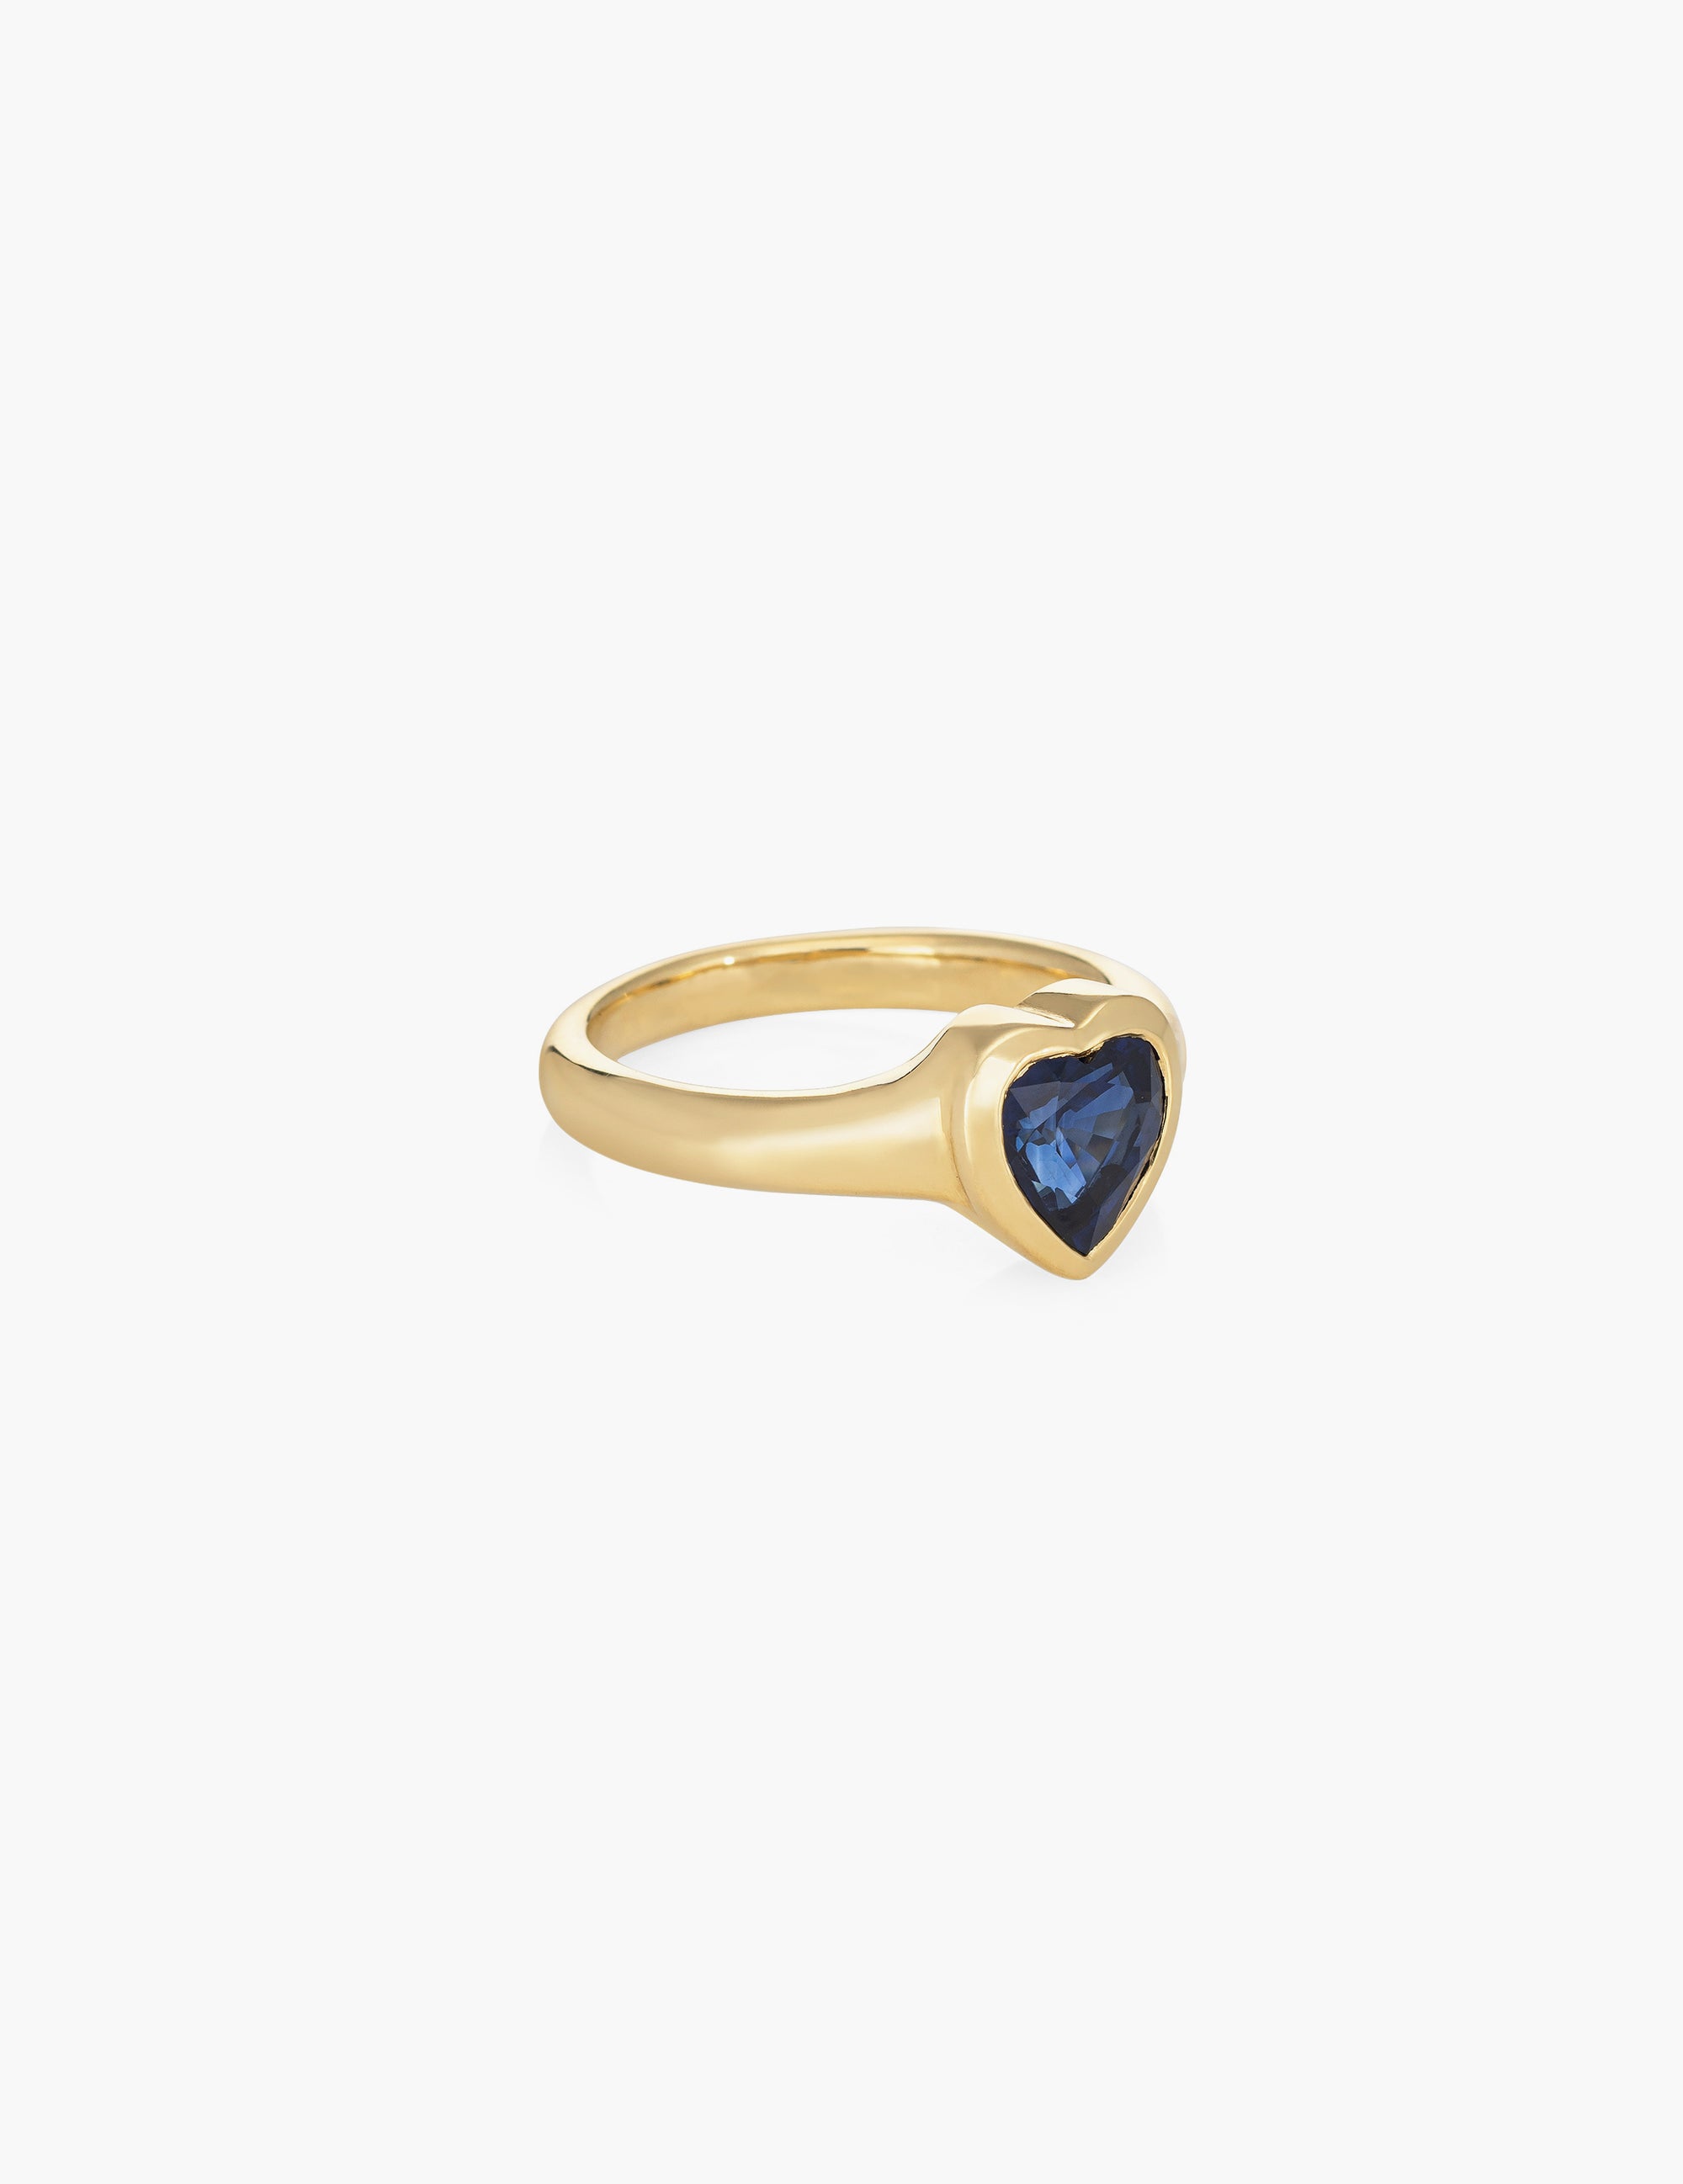 Large blue sapphire heart ring